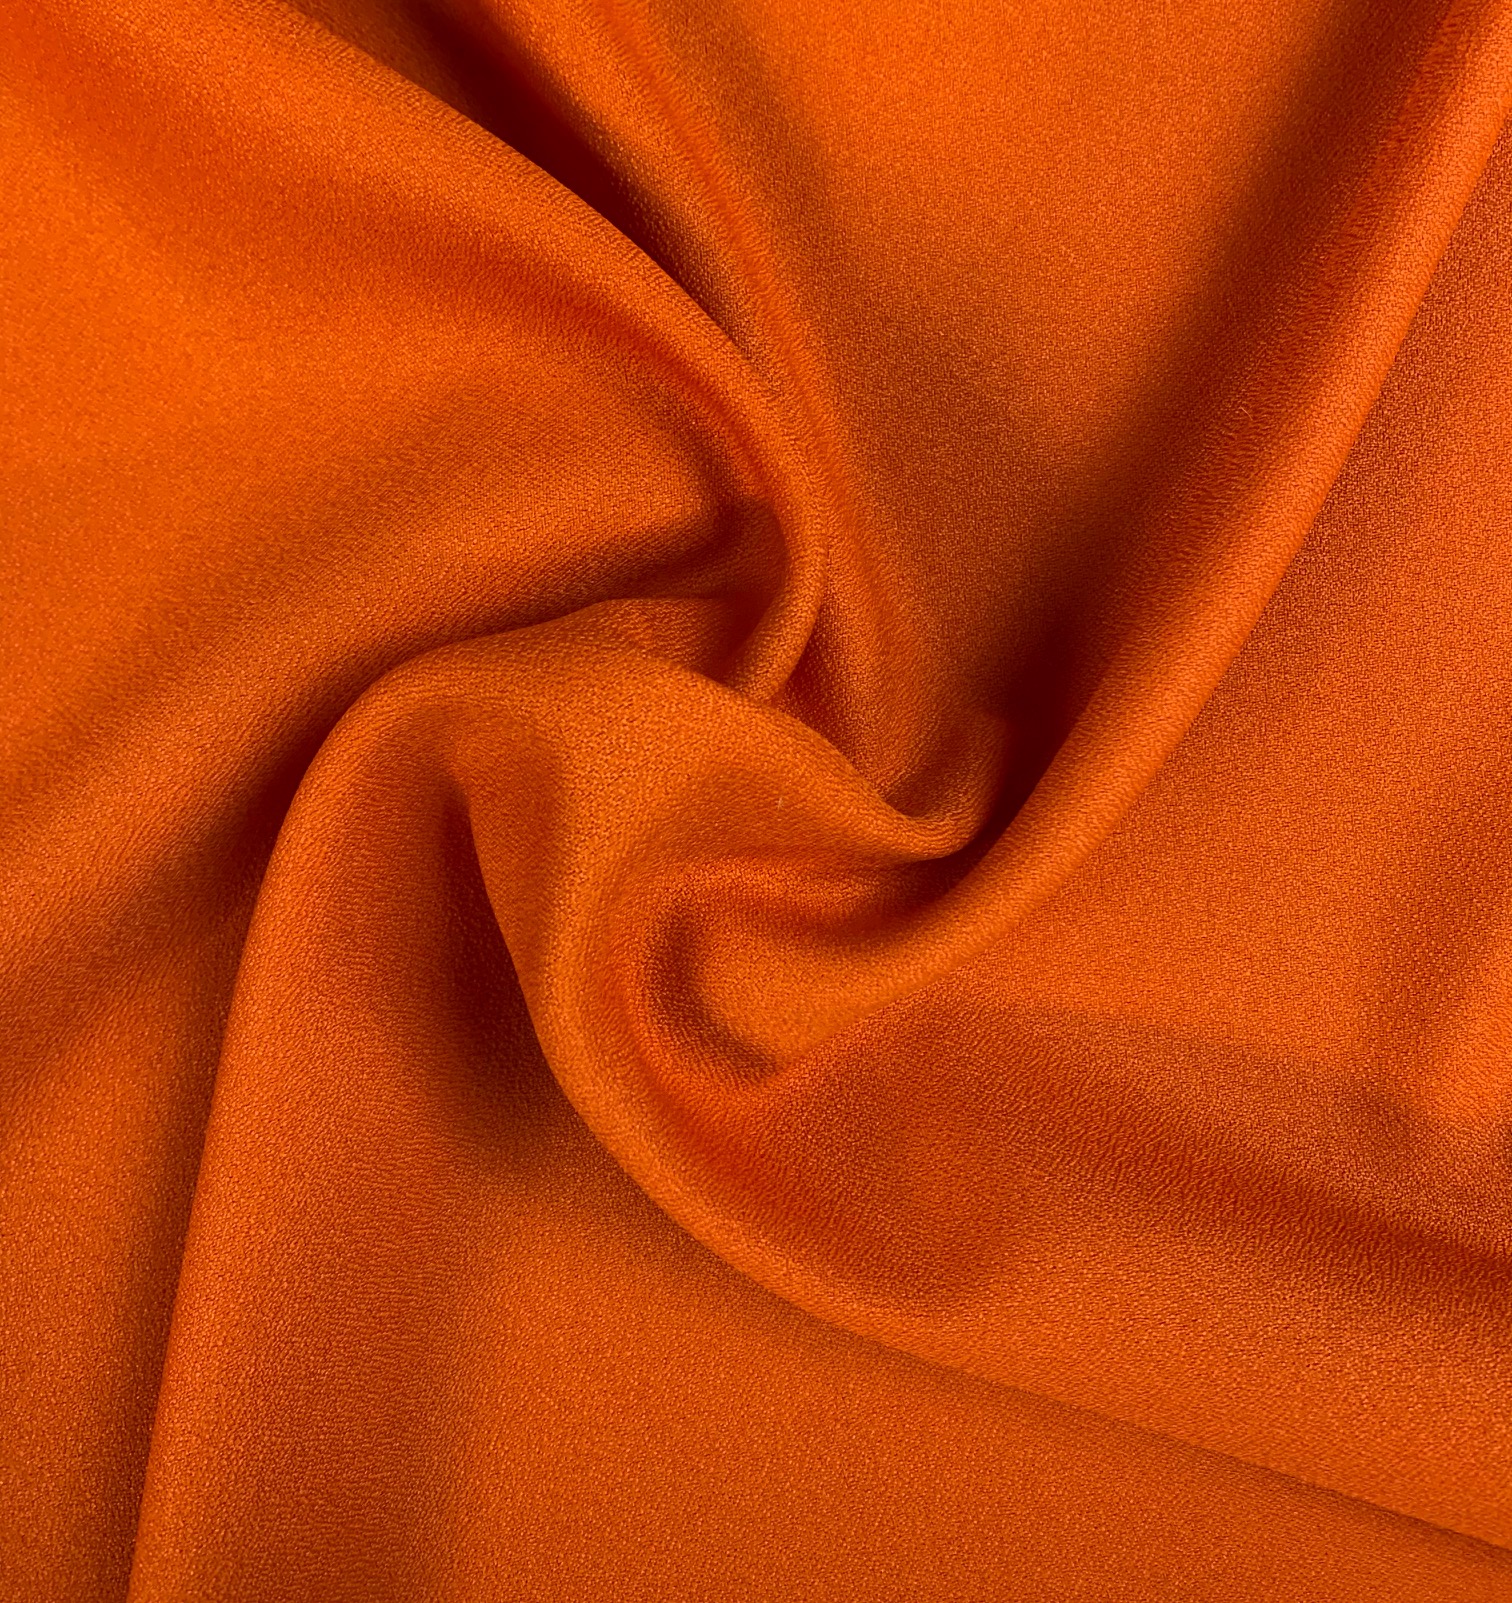 60" Wide Orange Crepe- By the yard (100% Polyester)